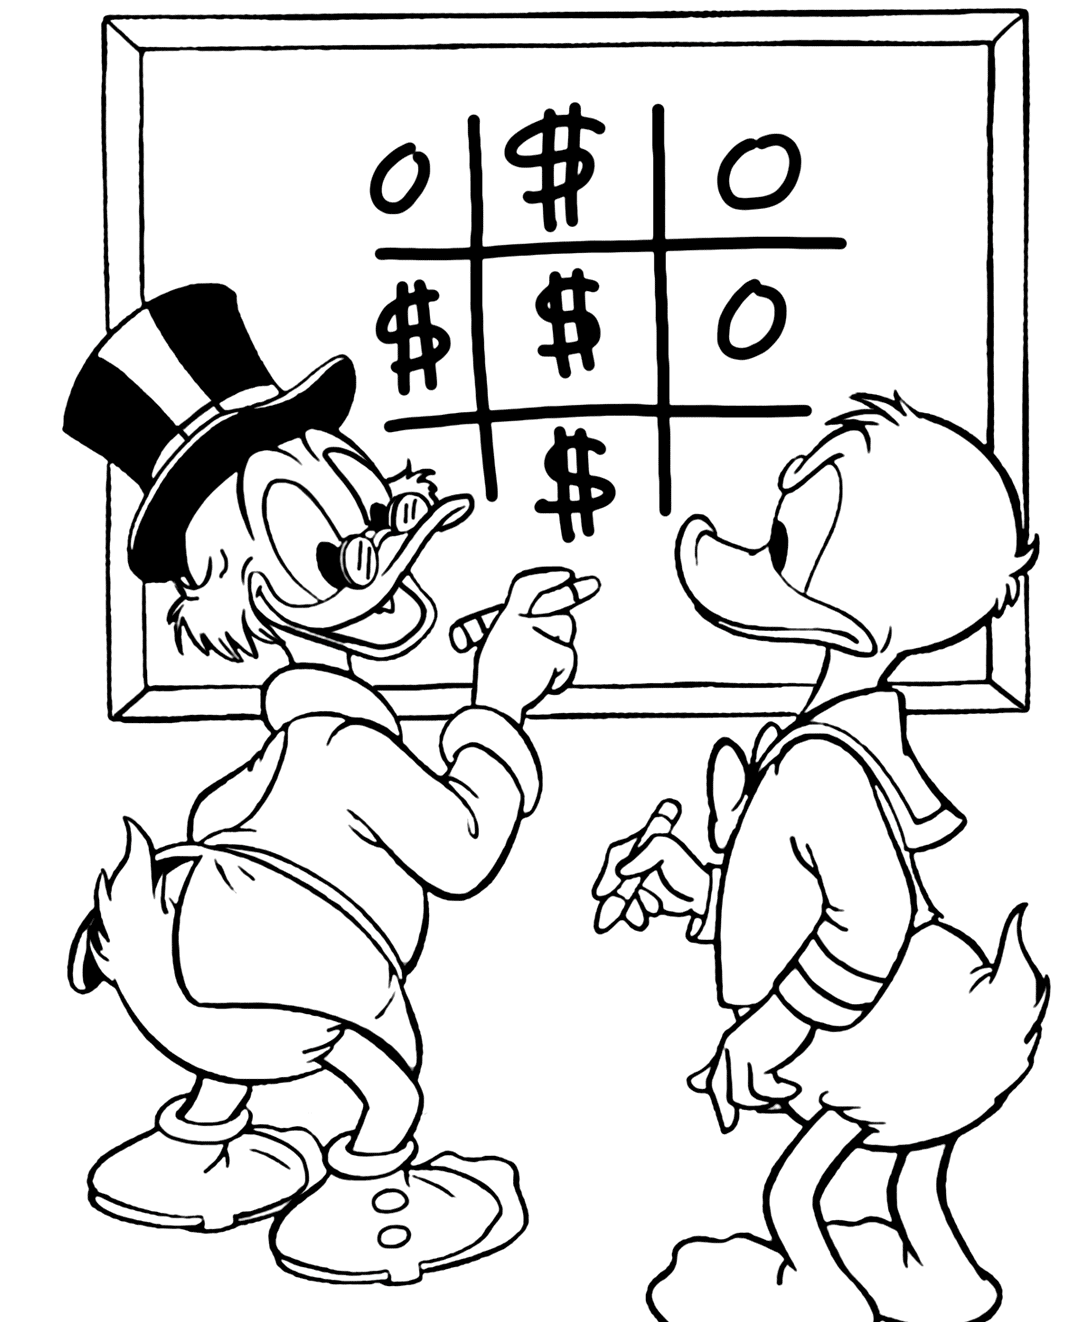 DuckTales Coloring Pages - Coloring Home